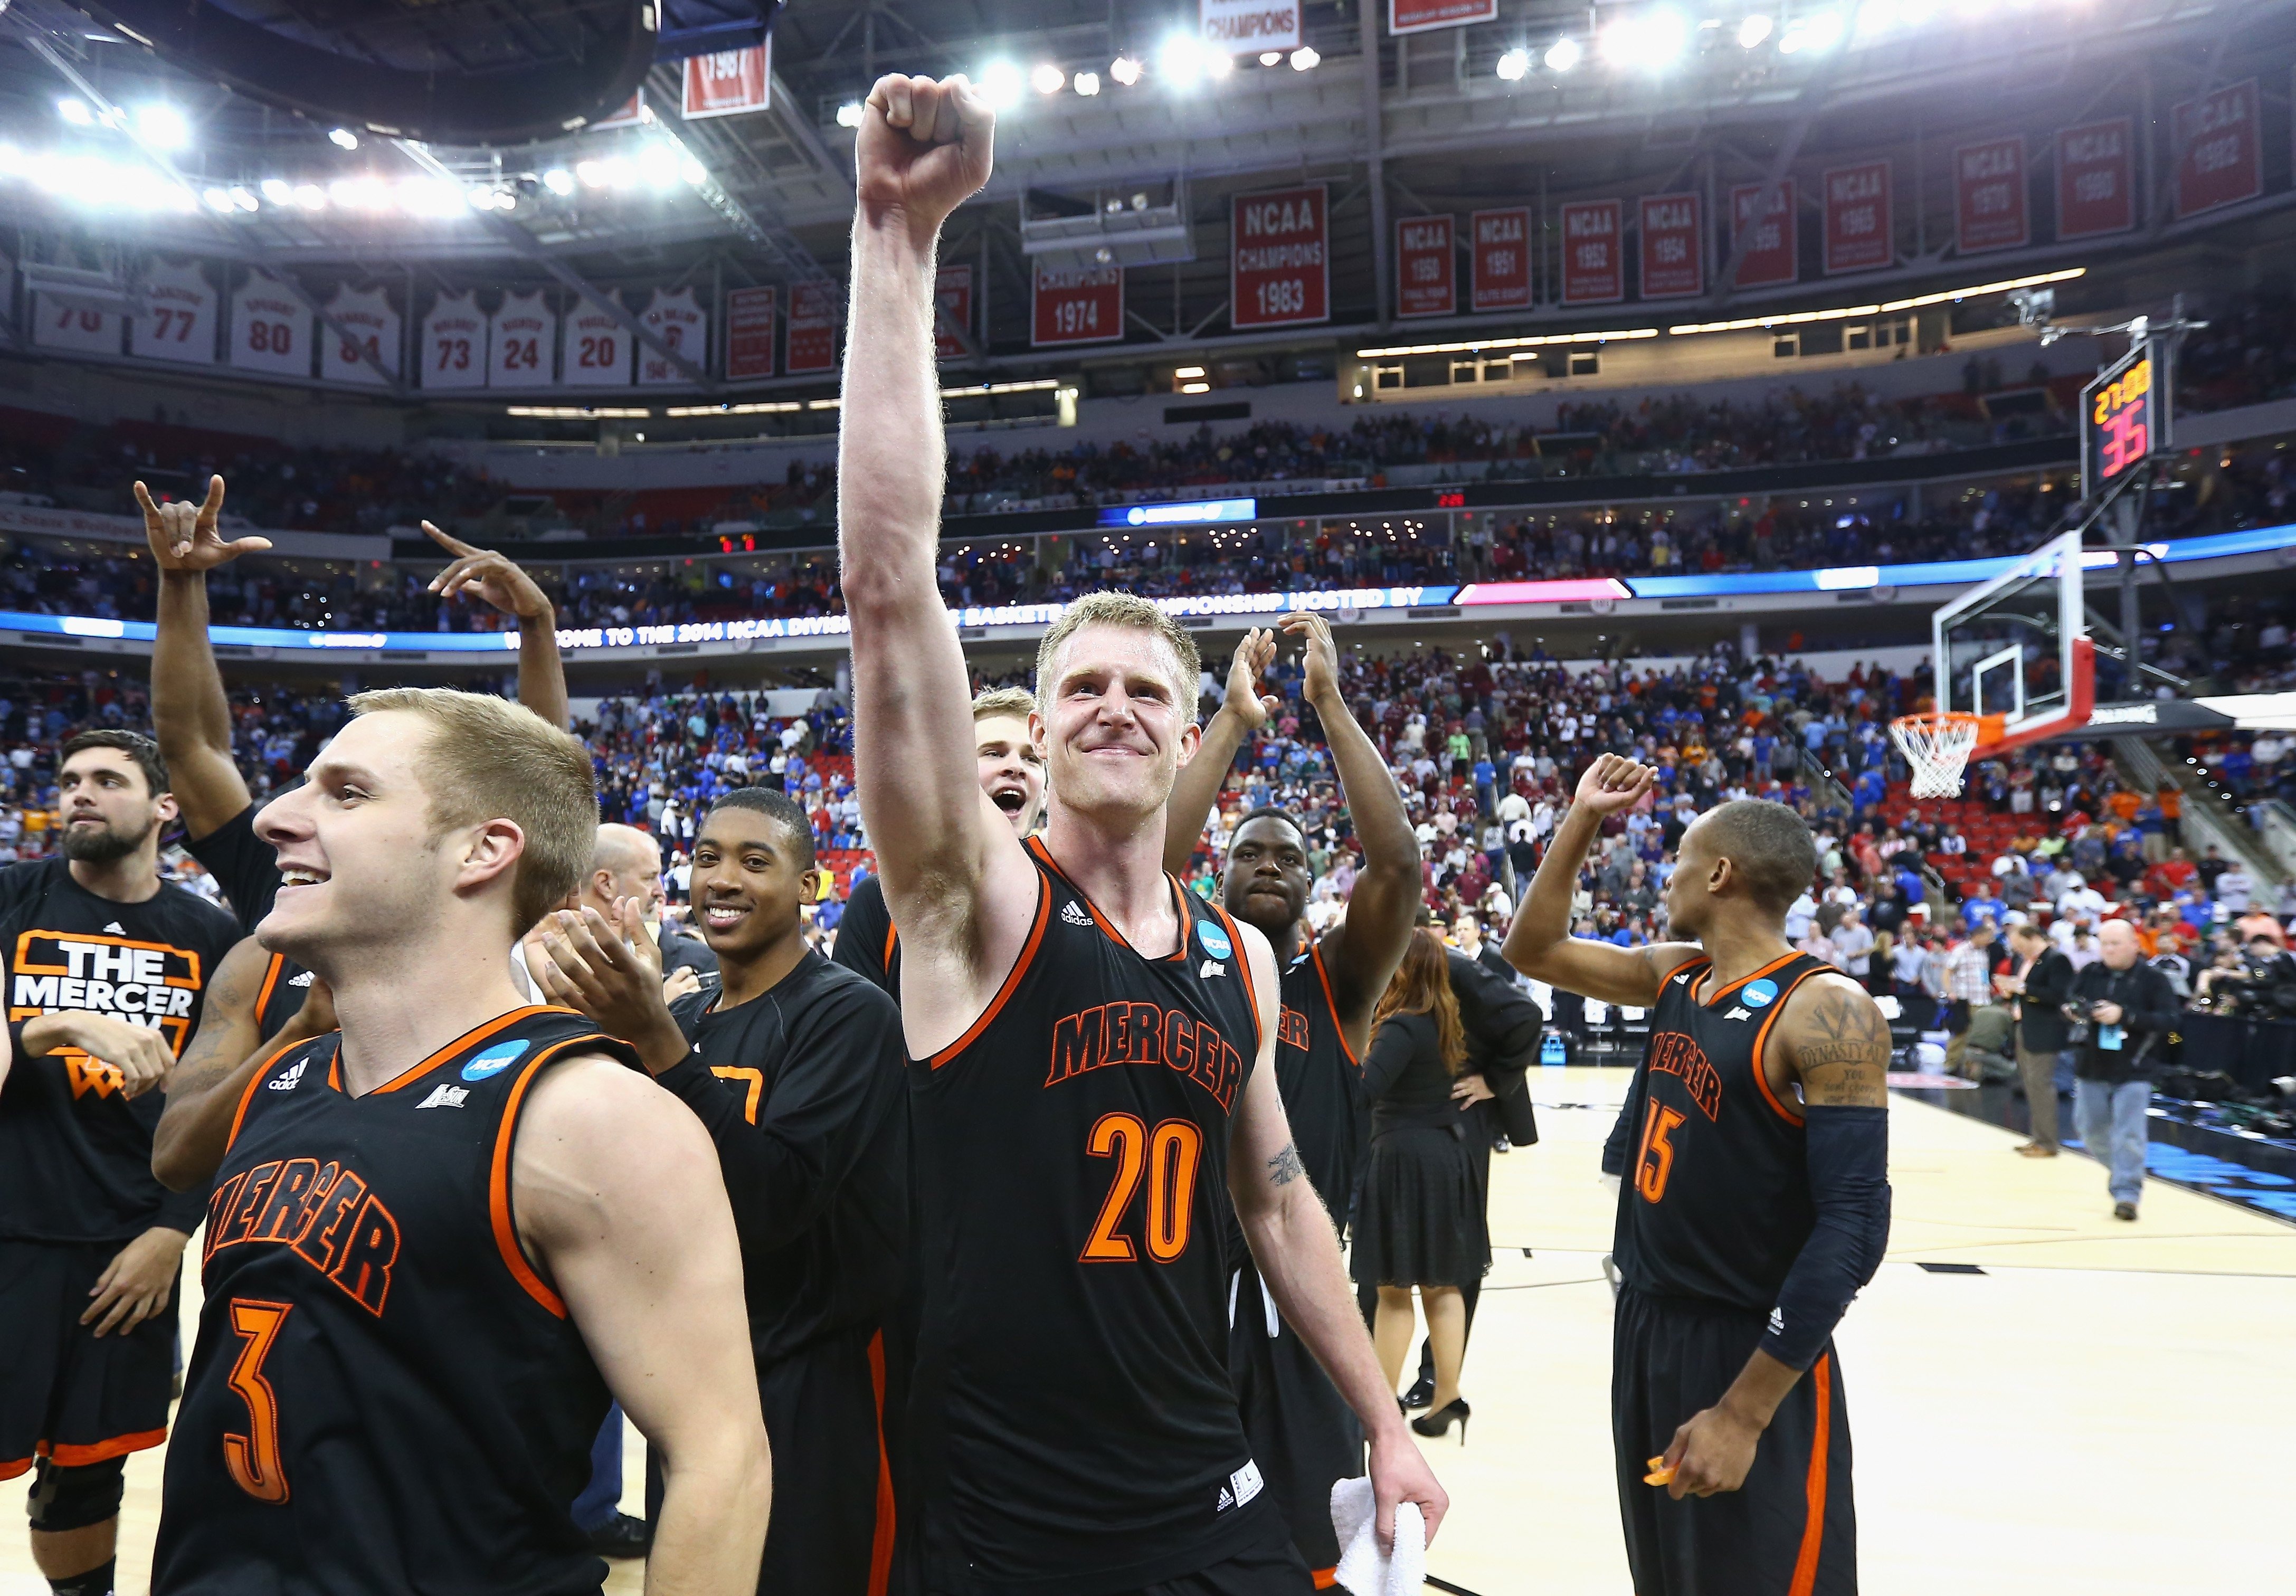 Jakob Gollon of the Mercer Bears celebrates with teammates after defeating the Duke Blue Devils 78-71 during the Second Round of the 2014 NCAA Basketball Tournament at PNC Arena on March 21, 2014 in Raleigh, N.C. (Streeter Lecka&mdash;Getty Images)